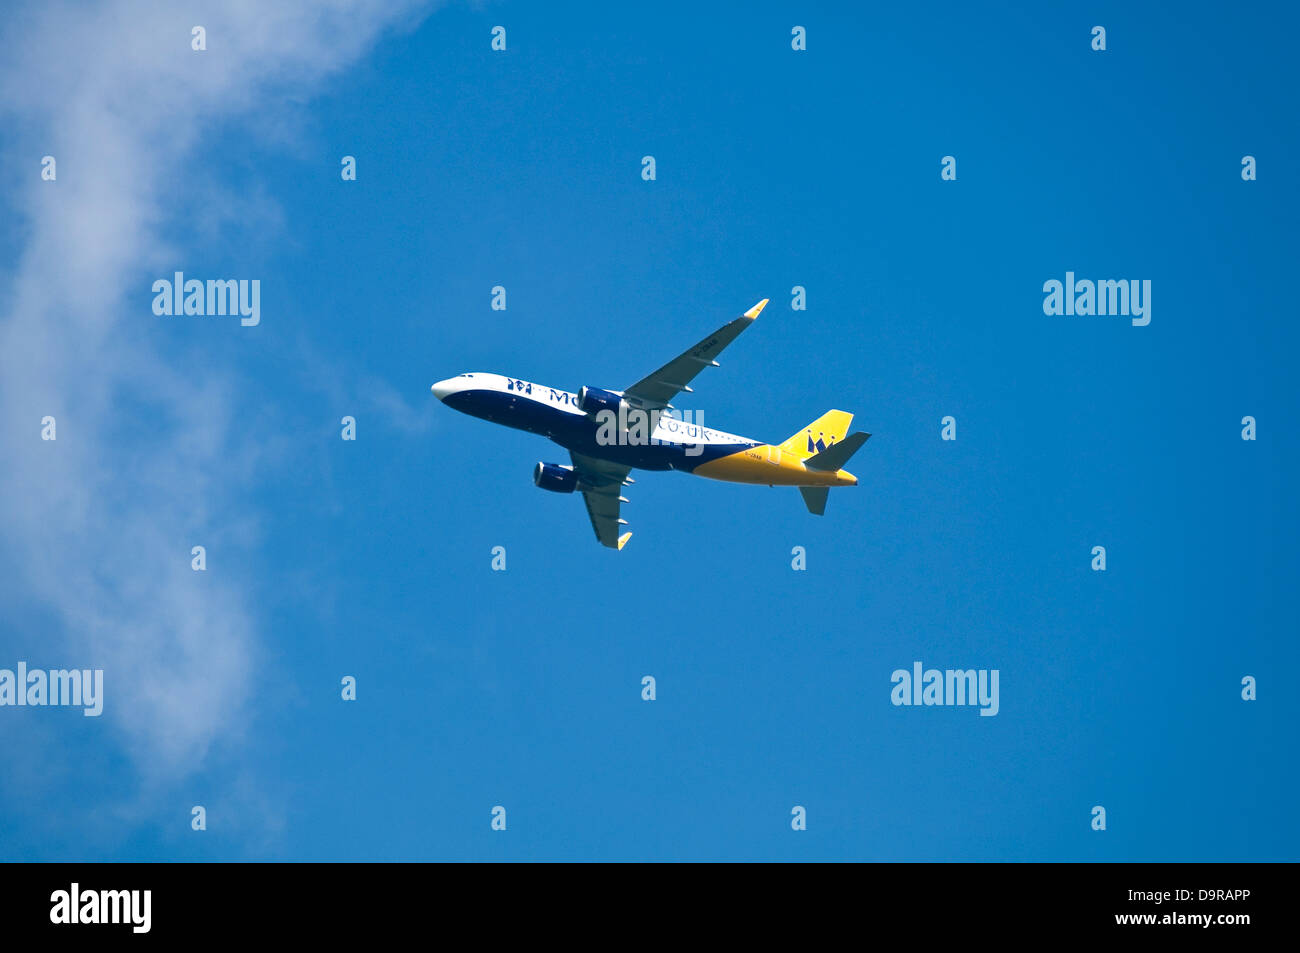 Horizontal close up of a new Monarch airlines Airbus 320 in flight. Stock Photo